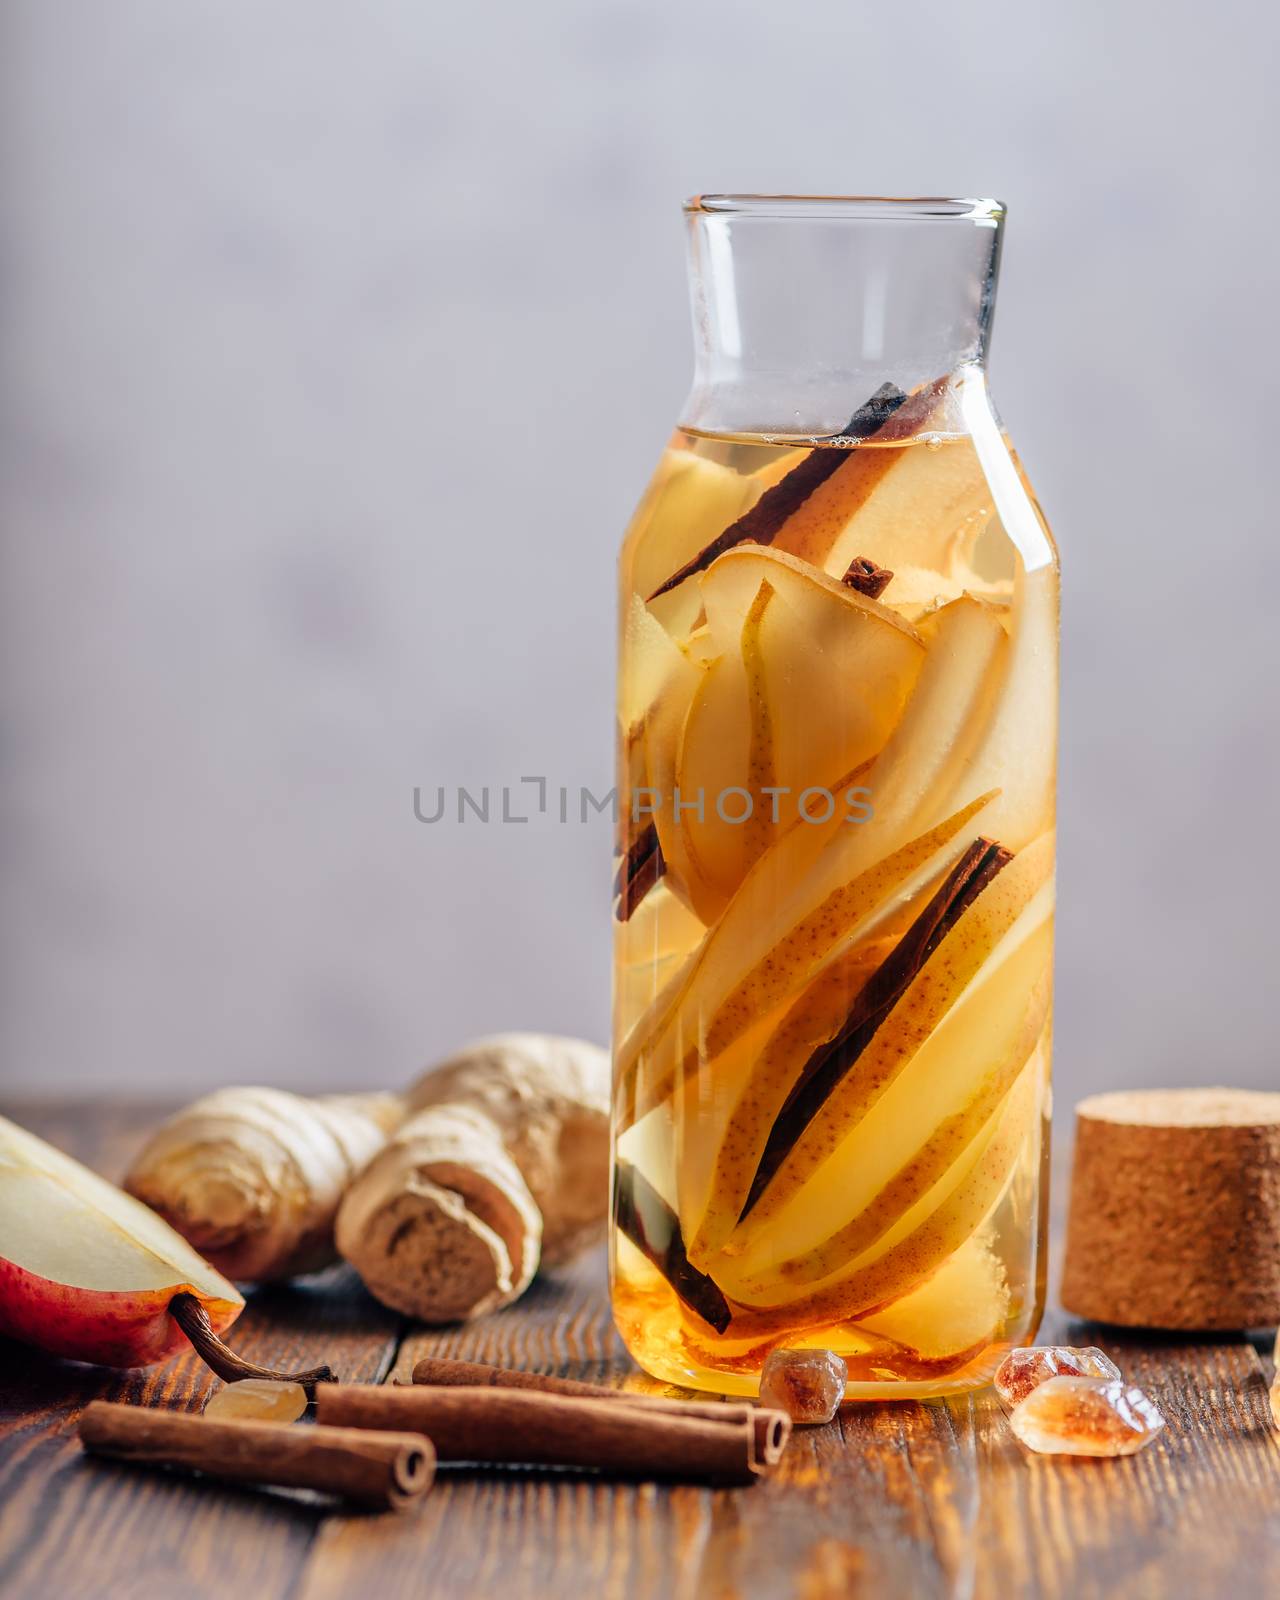 Water infused with Pear, Ginger and Cinnamon. by Seva_blsv